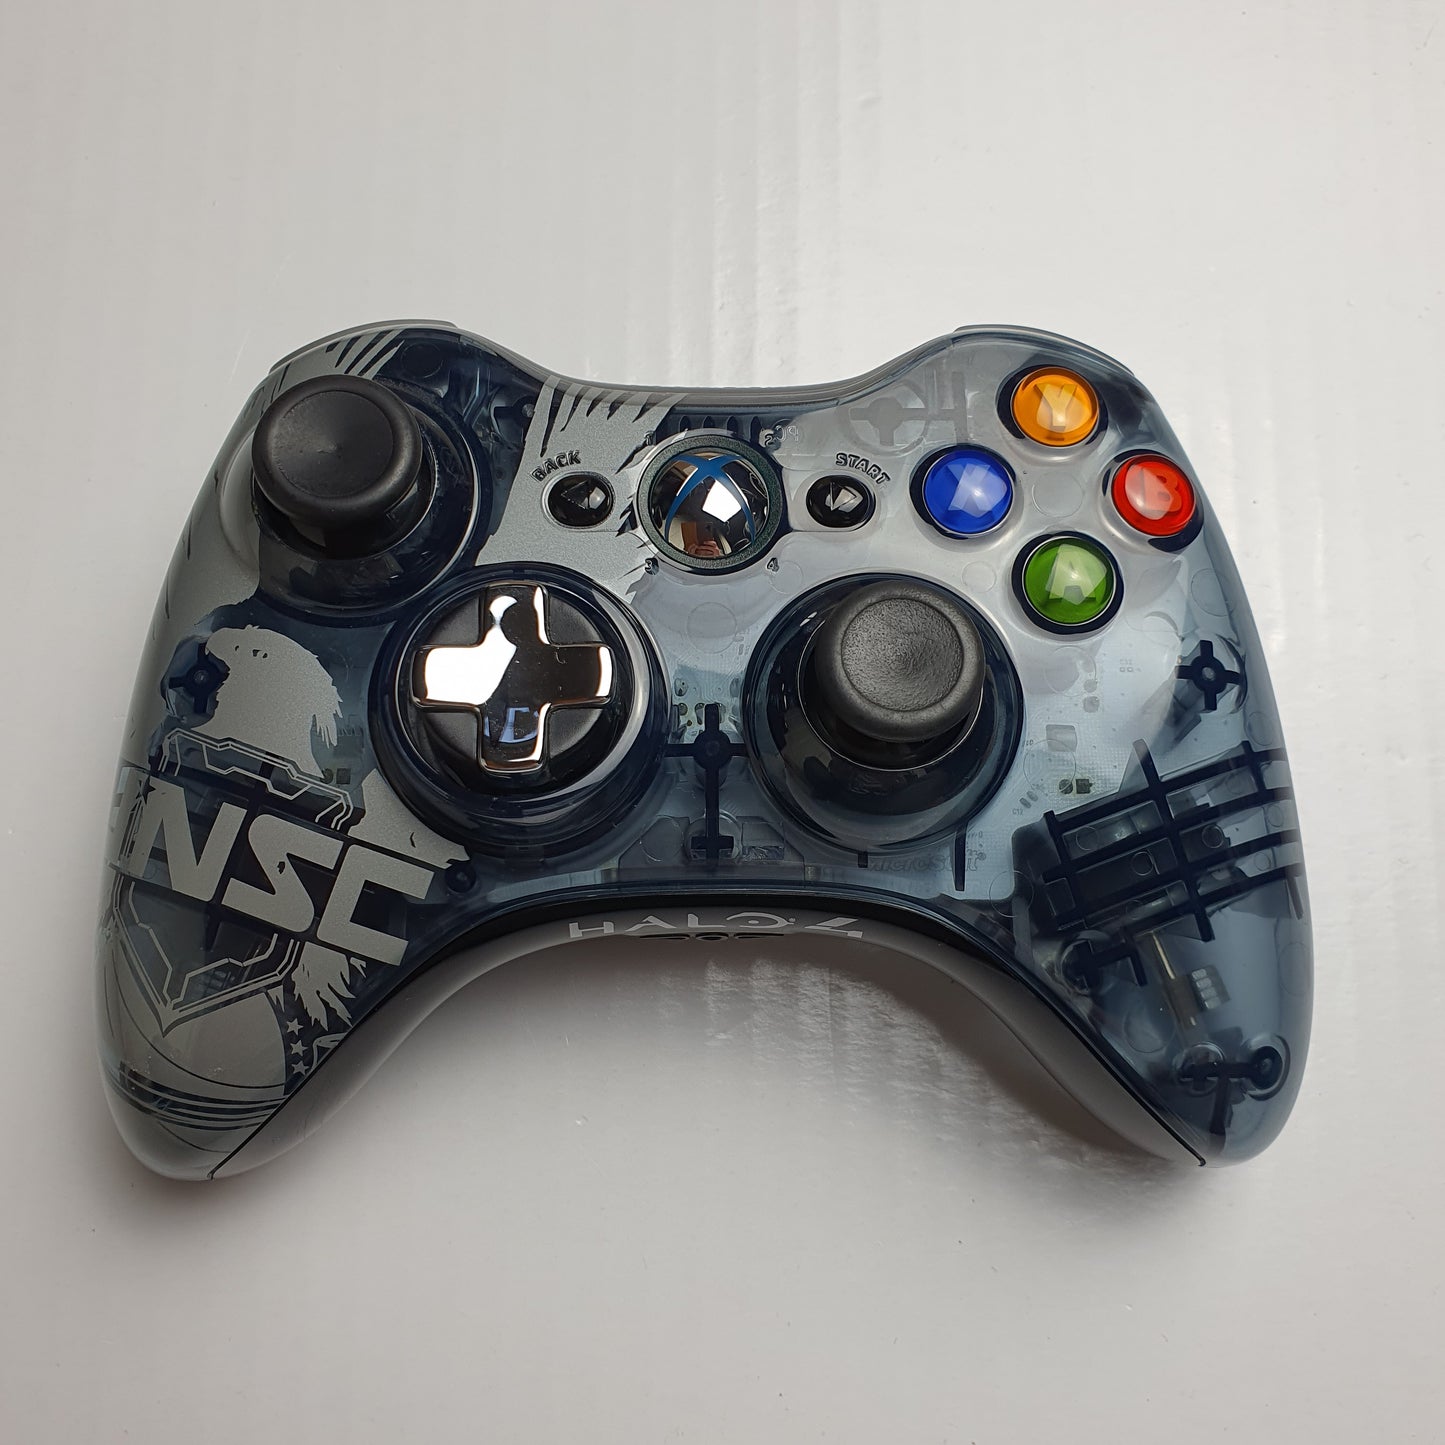 Official Microsoft Xbox 360 Limited Edition 'Halo 4' Wireless Controller